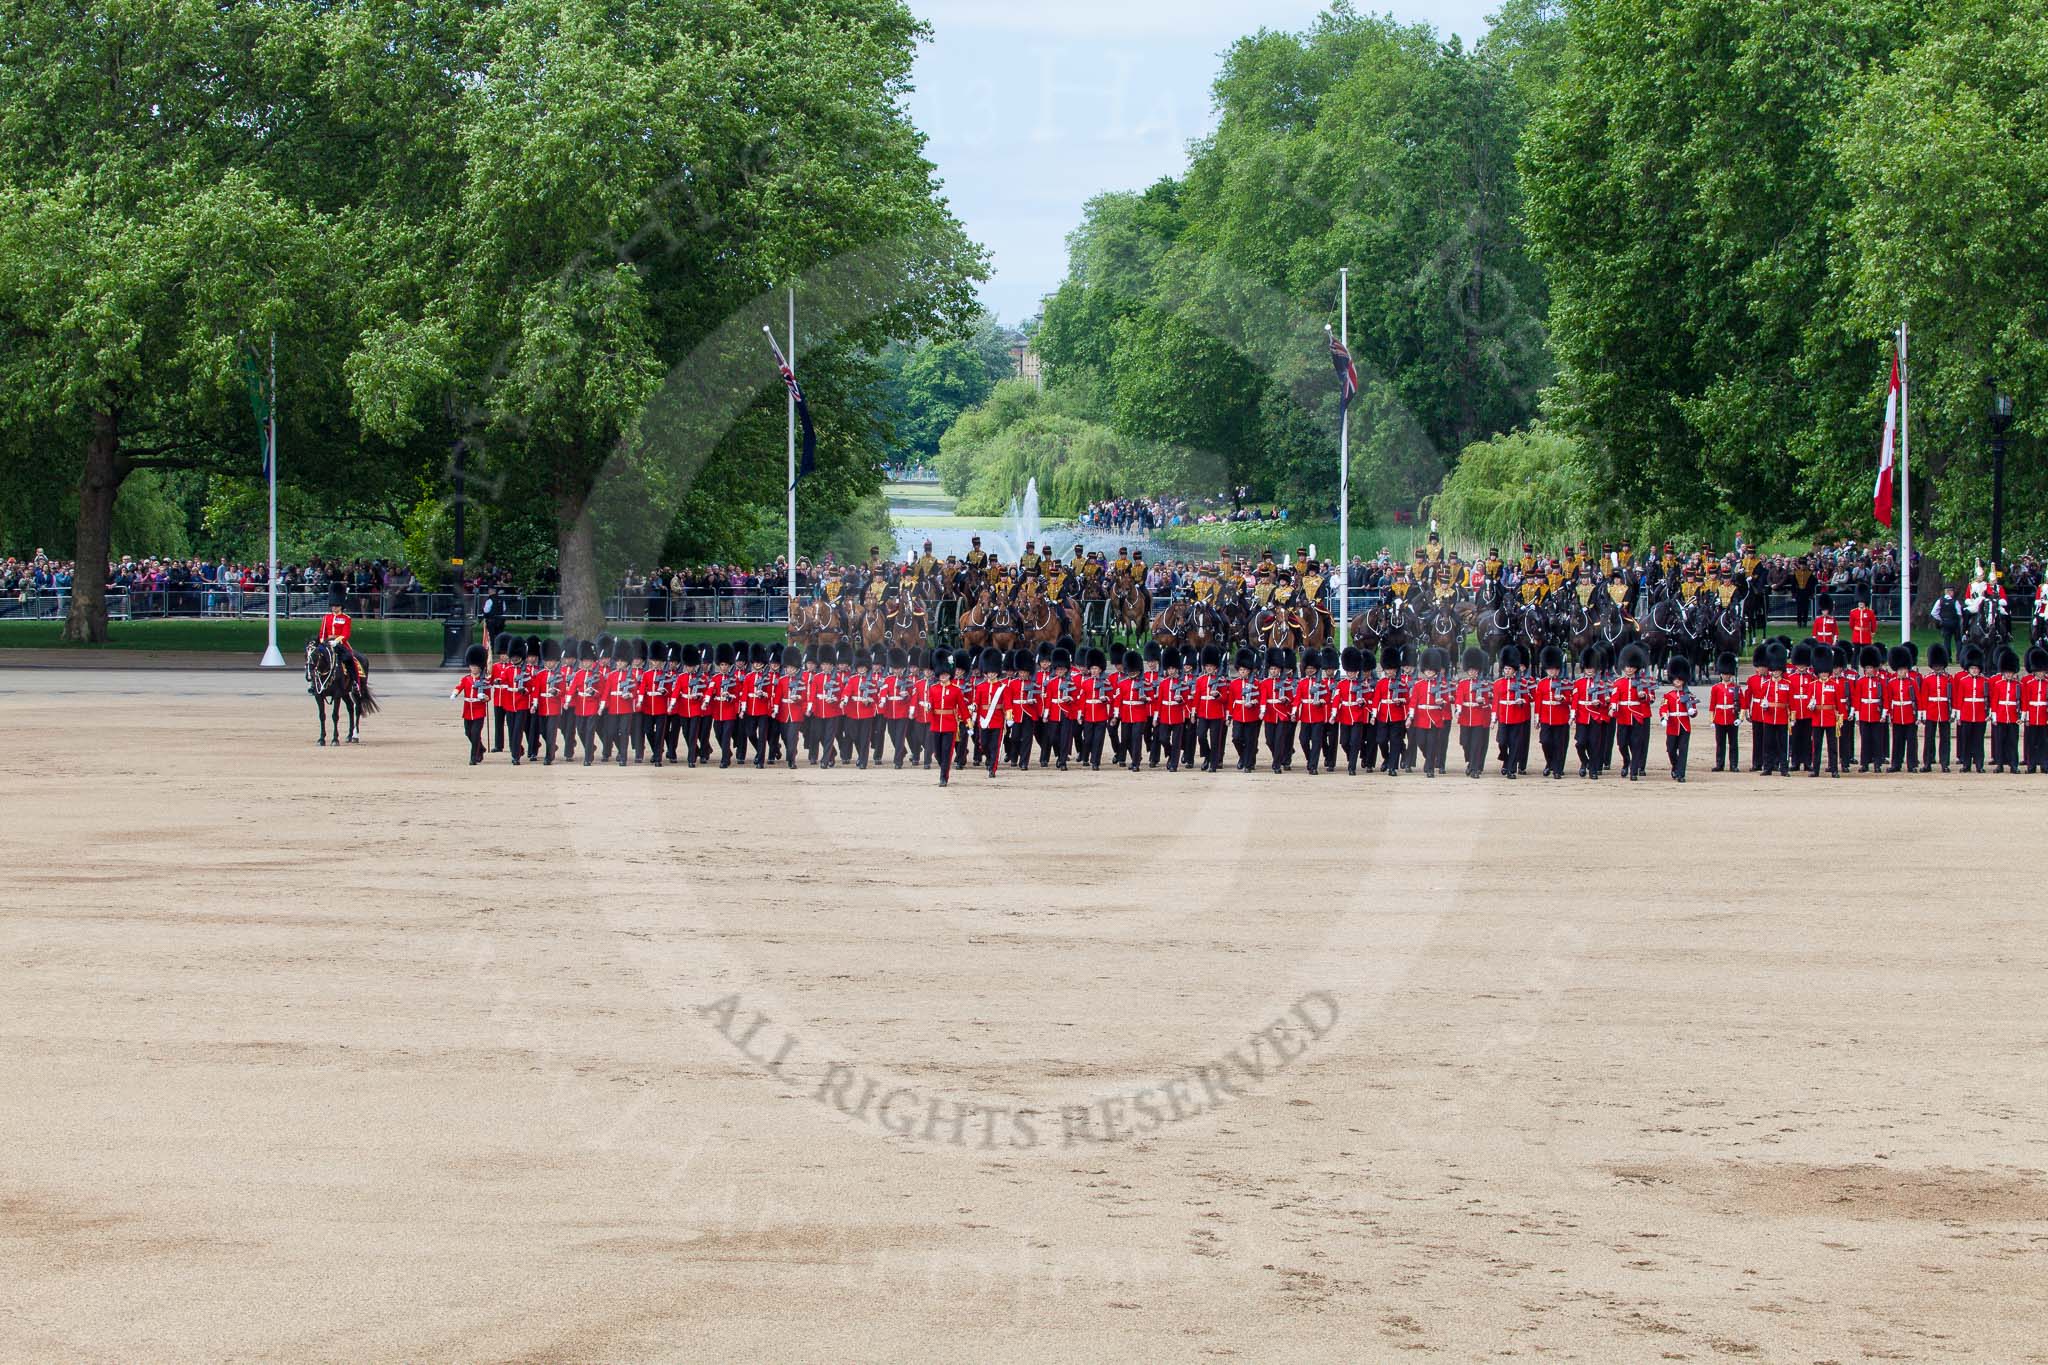 The Colonel's Review 2013: No. 1 Guard (Escort for the Colour),1st Battalion Welsh Guards is moving forward to receive the Colour..
Horse Guards Parade, Westminster,
London SW1,

United Kingdom,
on 08 June 2013 at 11:16, image #482